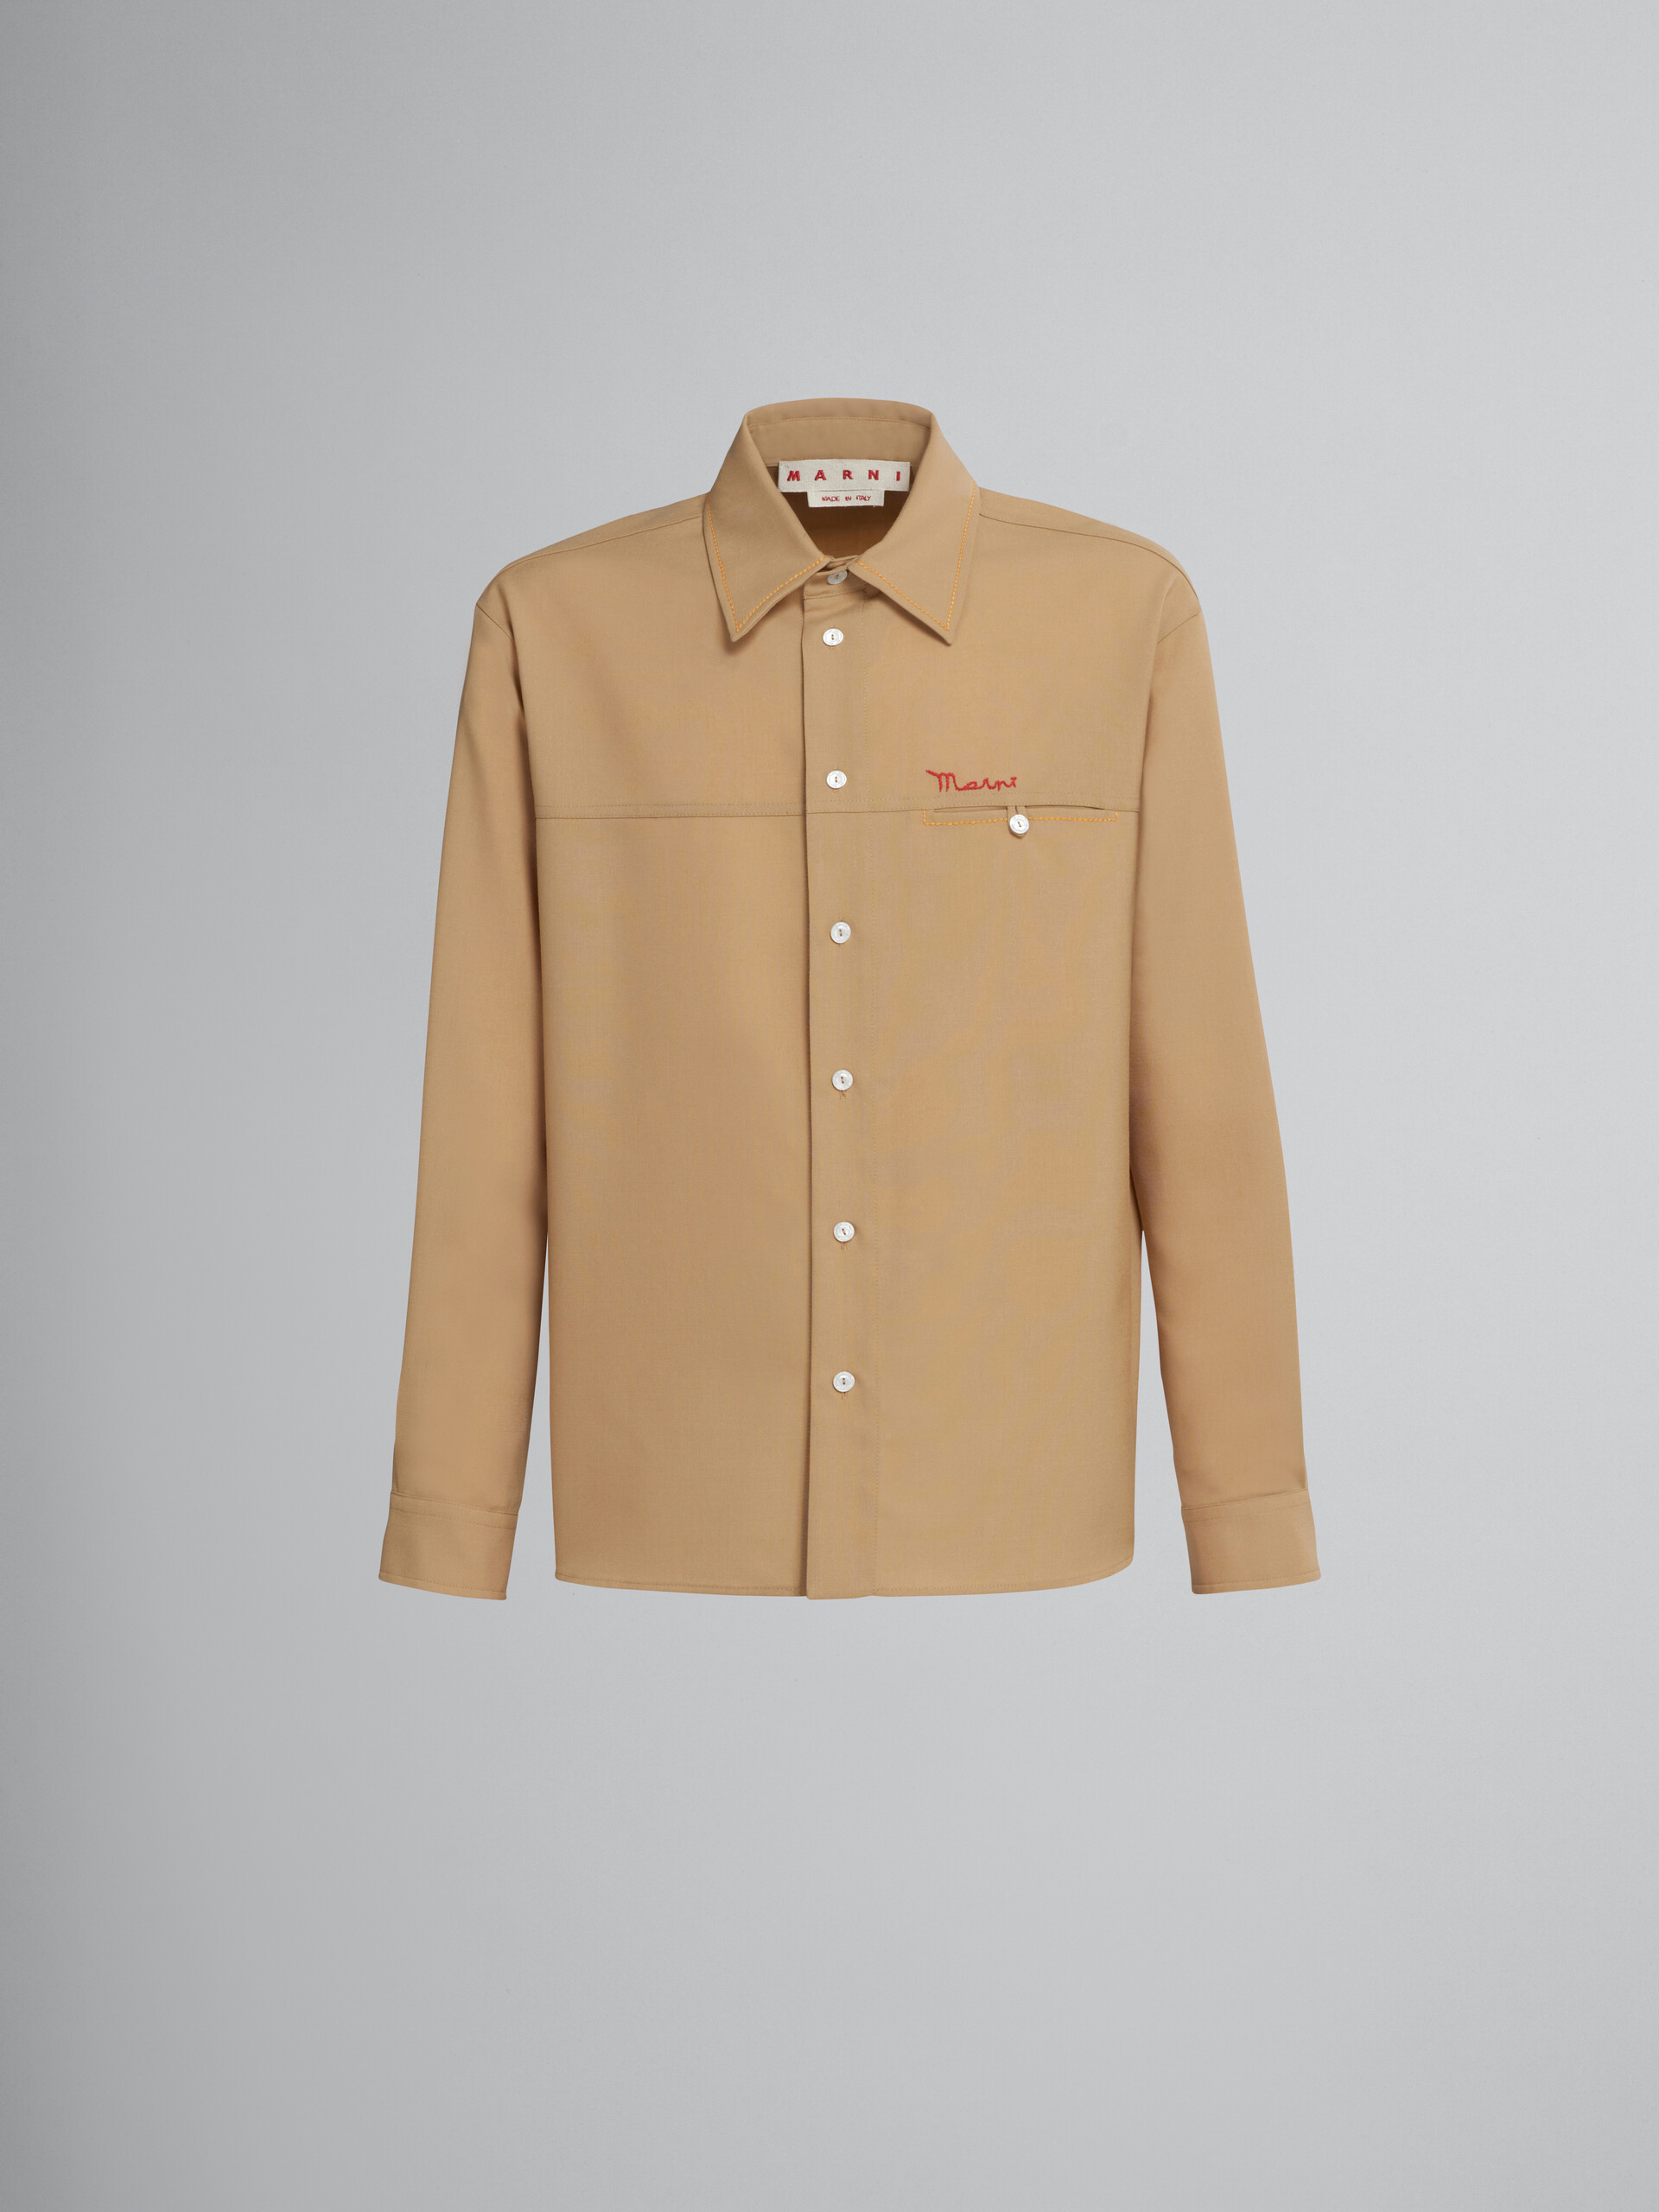 Beige tropical wool shirt with embroidered logo - Shirts - Image 1